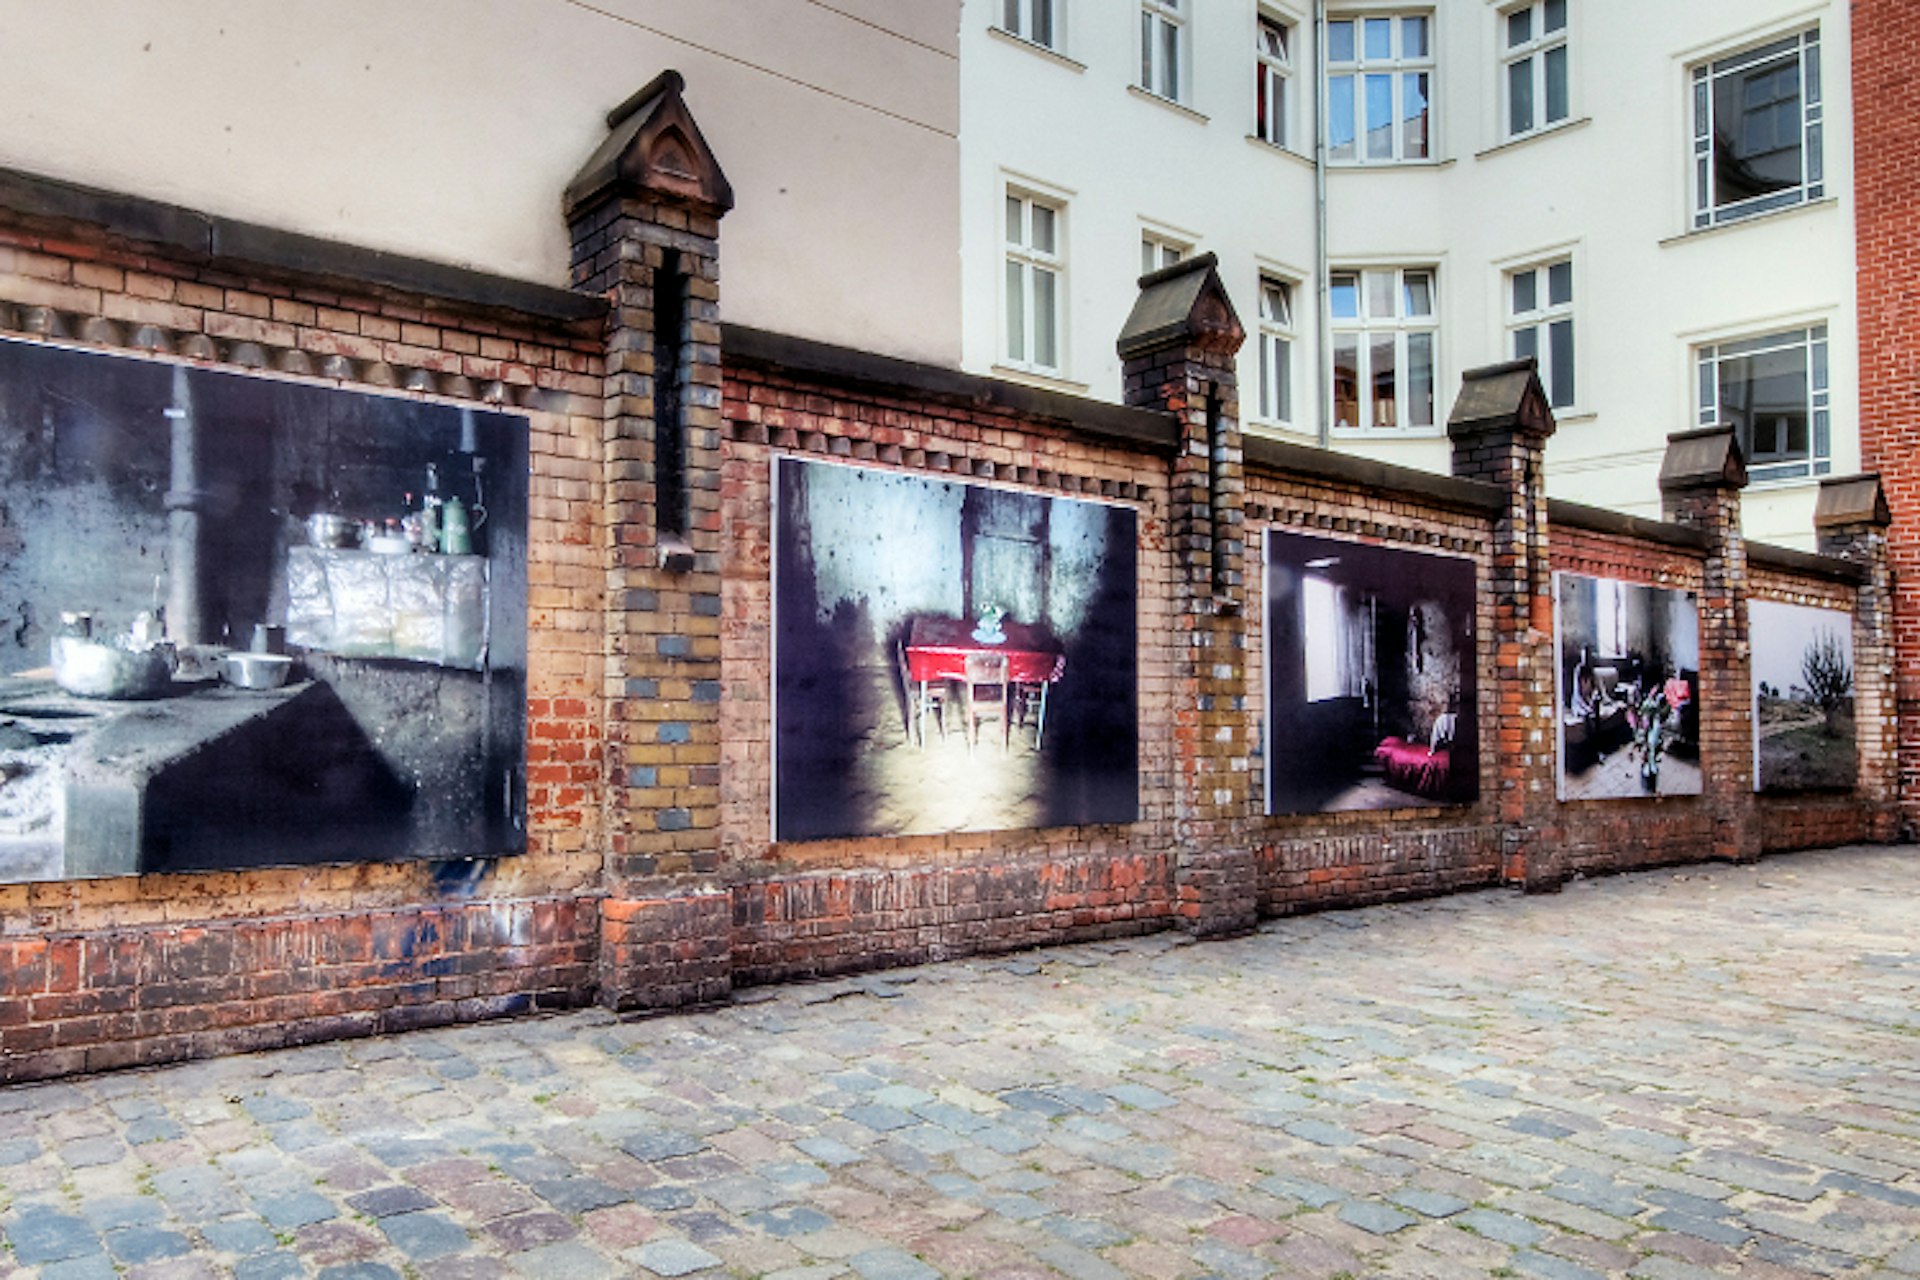 Auguststrasse, birthplace of the post-Wall contemporary gallery scene in Berlin. Image by Wolfgang Staudt / CC BY 2.0